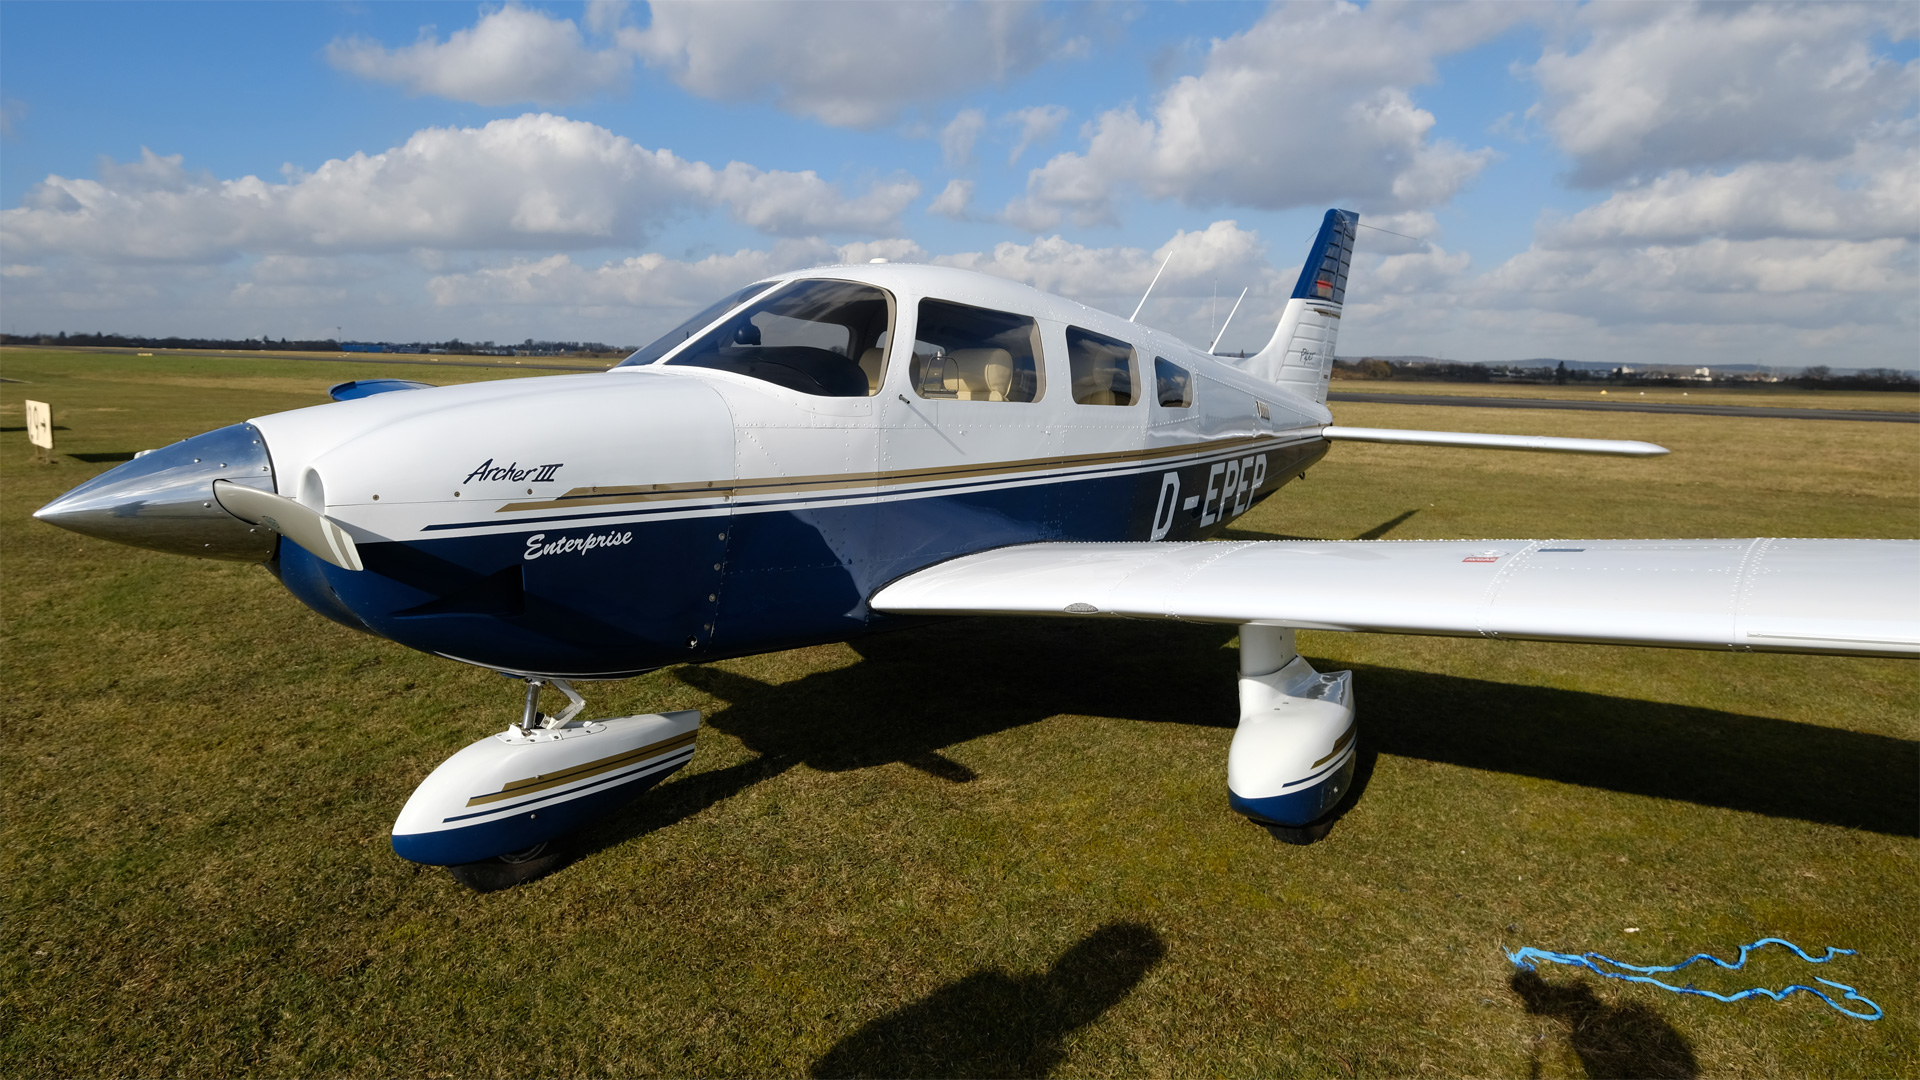 Piper PA 28 Archer III (D-EPEP)